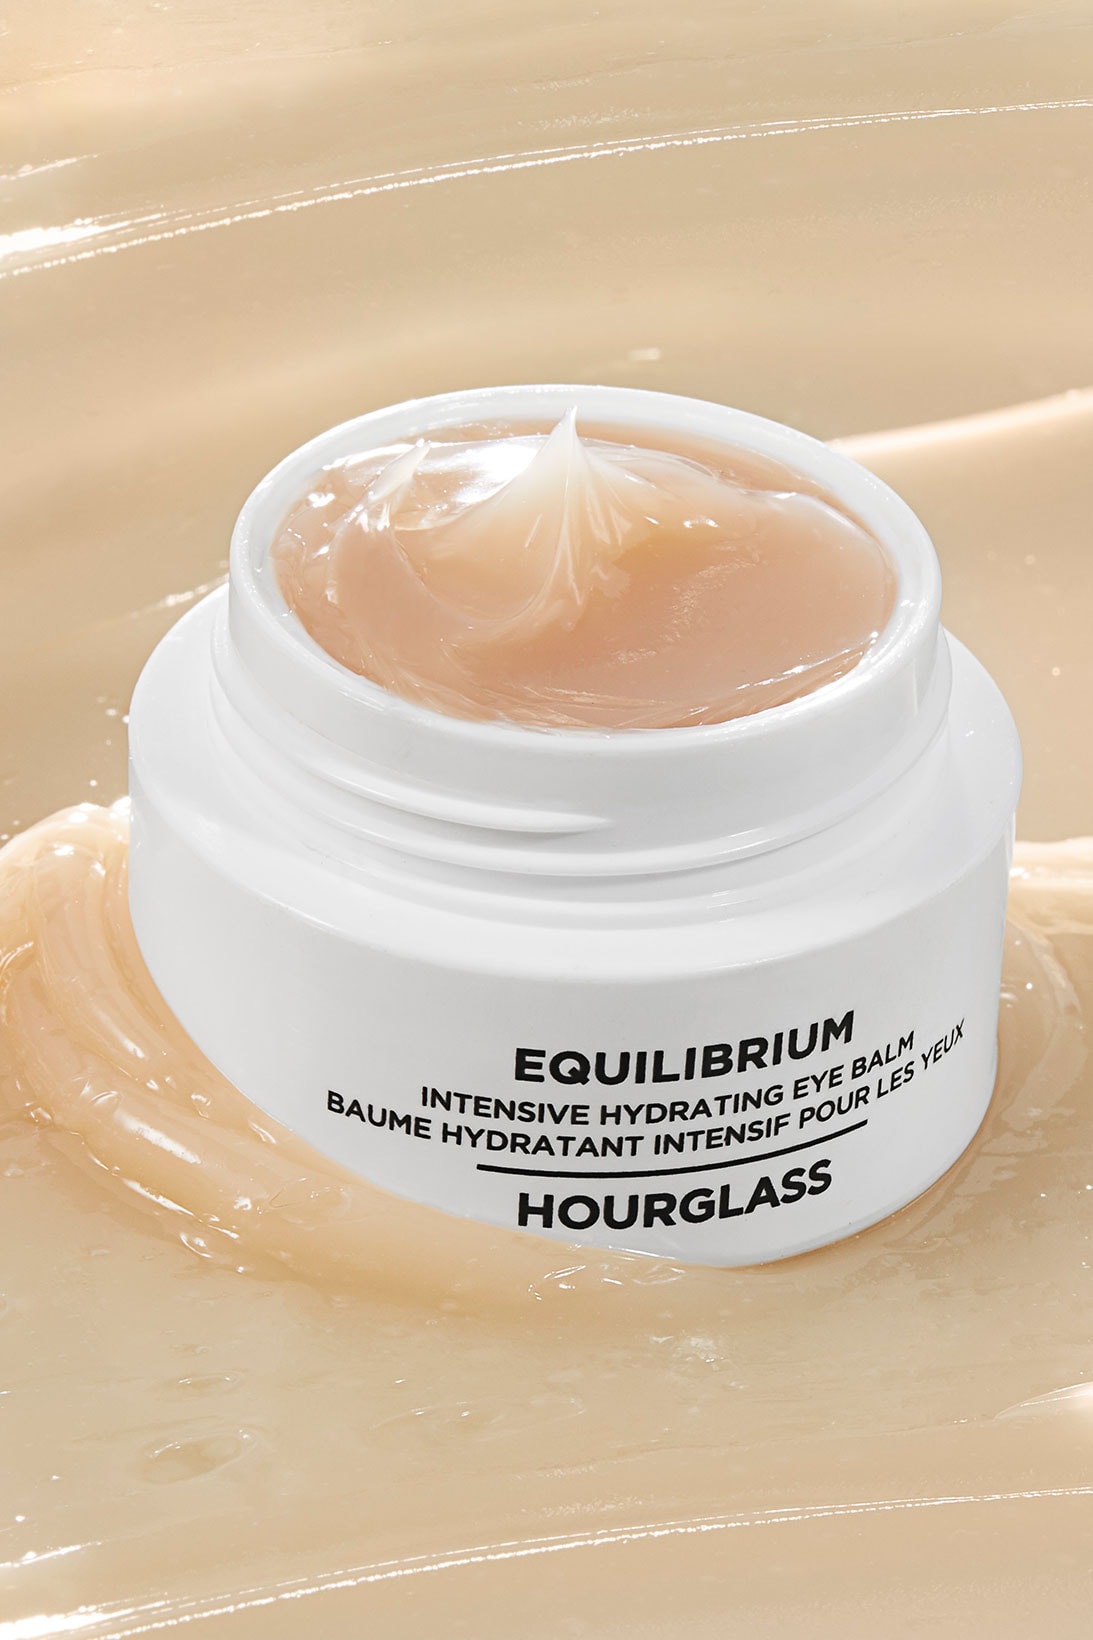 hourglass skincare launch equilibrium collection intensive hydrating eye balm cream